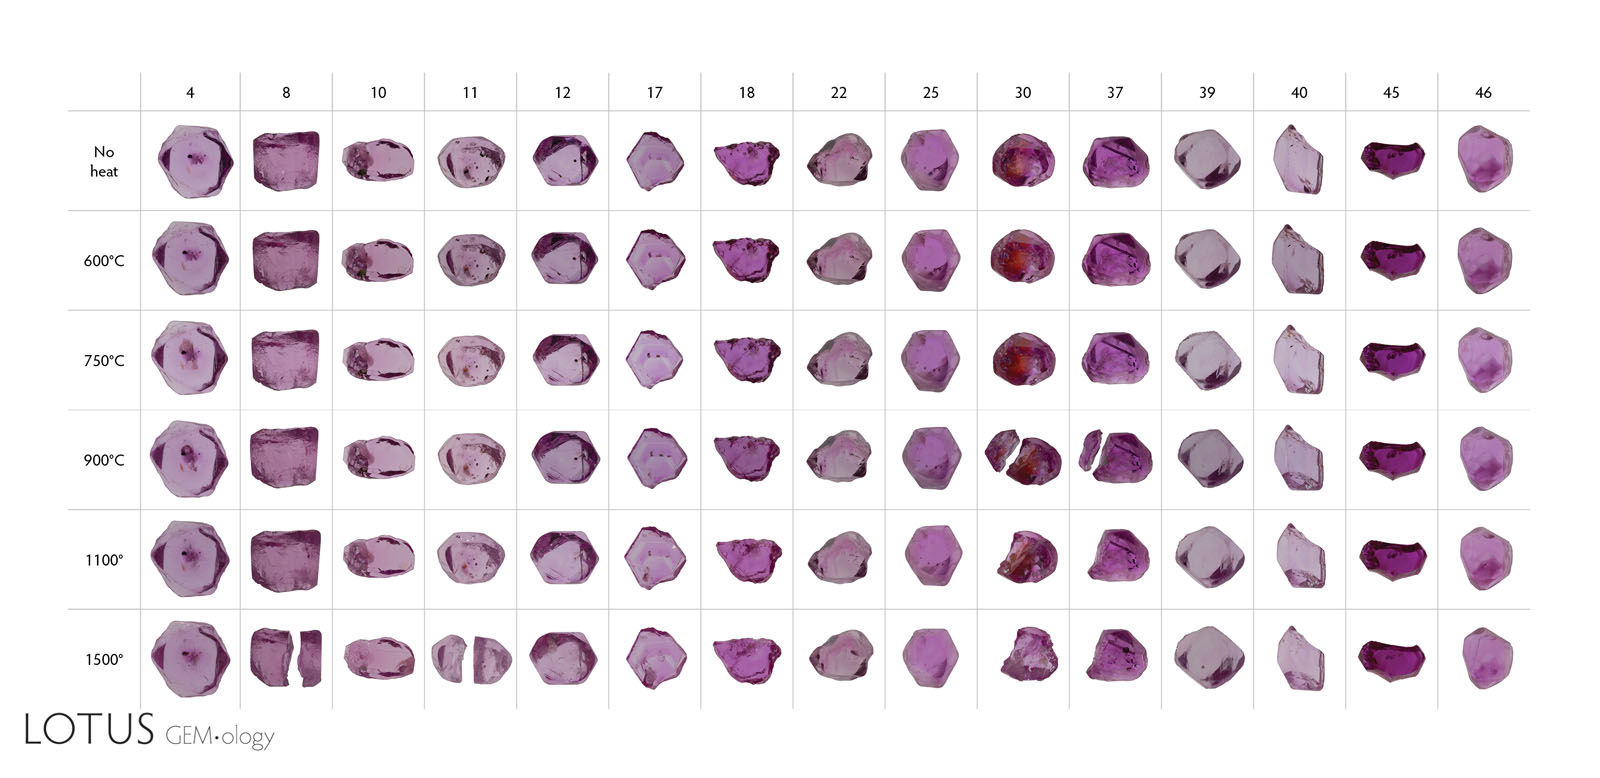 Figure 2. The 15 ruby samples from the experiments, before heat treatment and after each stage of heating. While the overall bodycolors did not show significant changes, there were changes to clarity as the inclusions al- tered. Sample 30 in particular showed a dramatic change in color due to the alteration of iron staining in a large fissure. Four samples (8, 11, 30, and 37) broke apart during heat treatment. We continued to heat the larger of the two pieces in subsequent rounds. Photos by Sora-at Manorotkul.